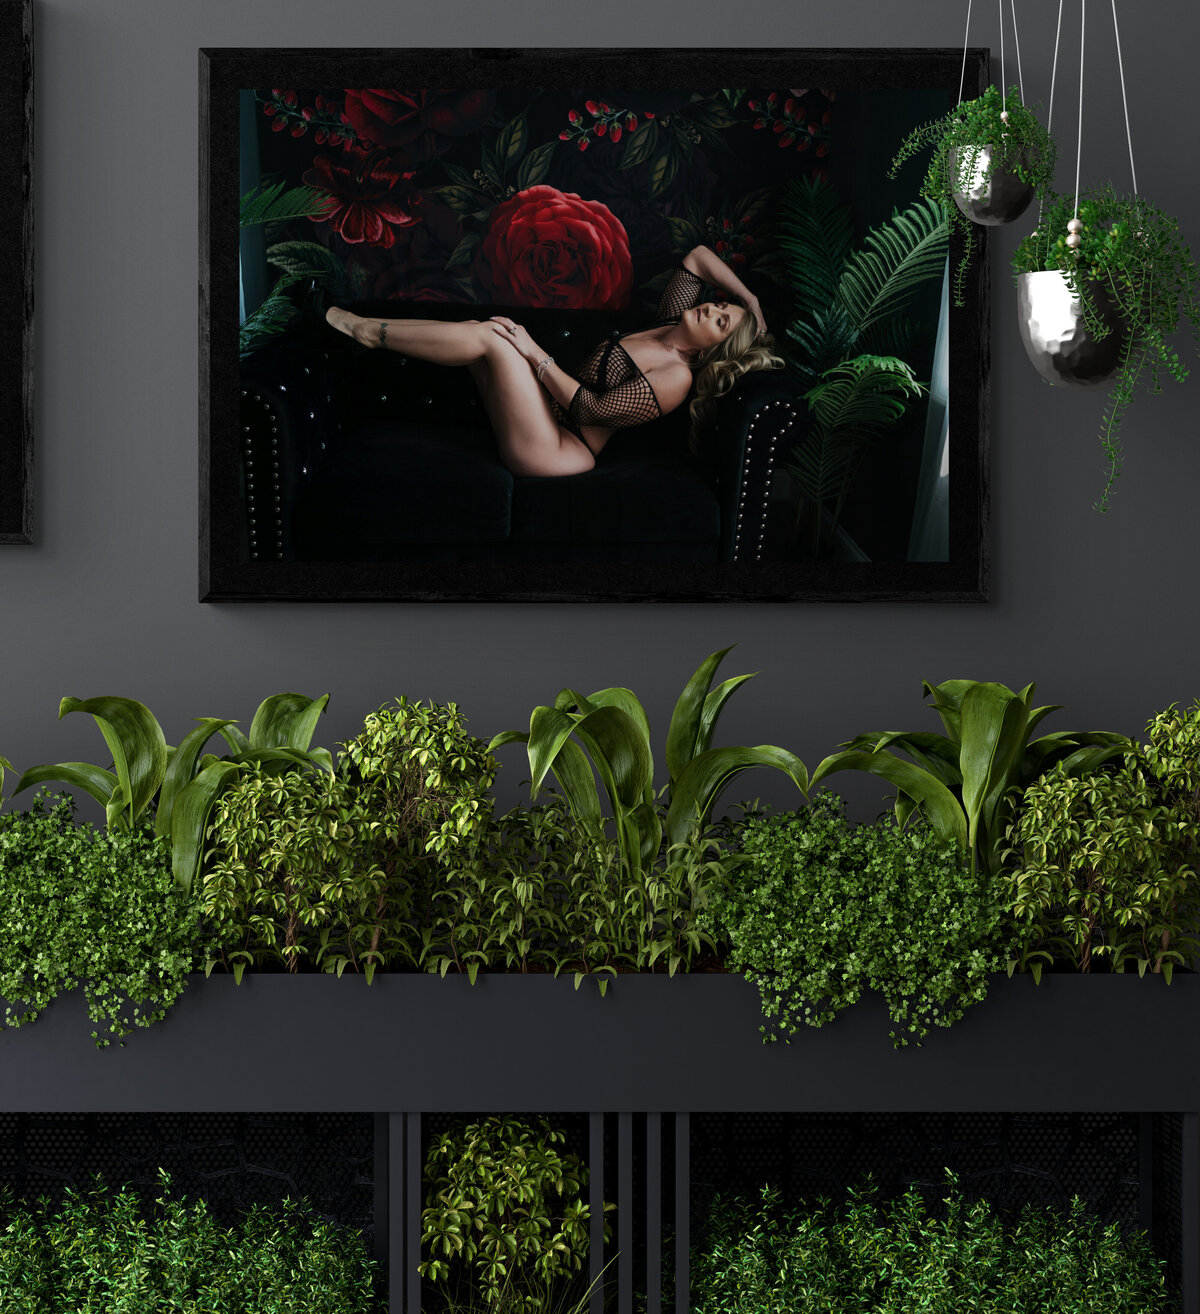 Artwork of a woman in black mesh lingerie hanging on a wall surrounded by indoor house plants